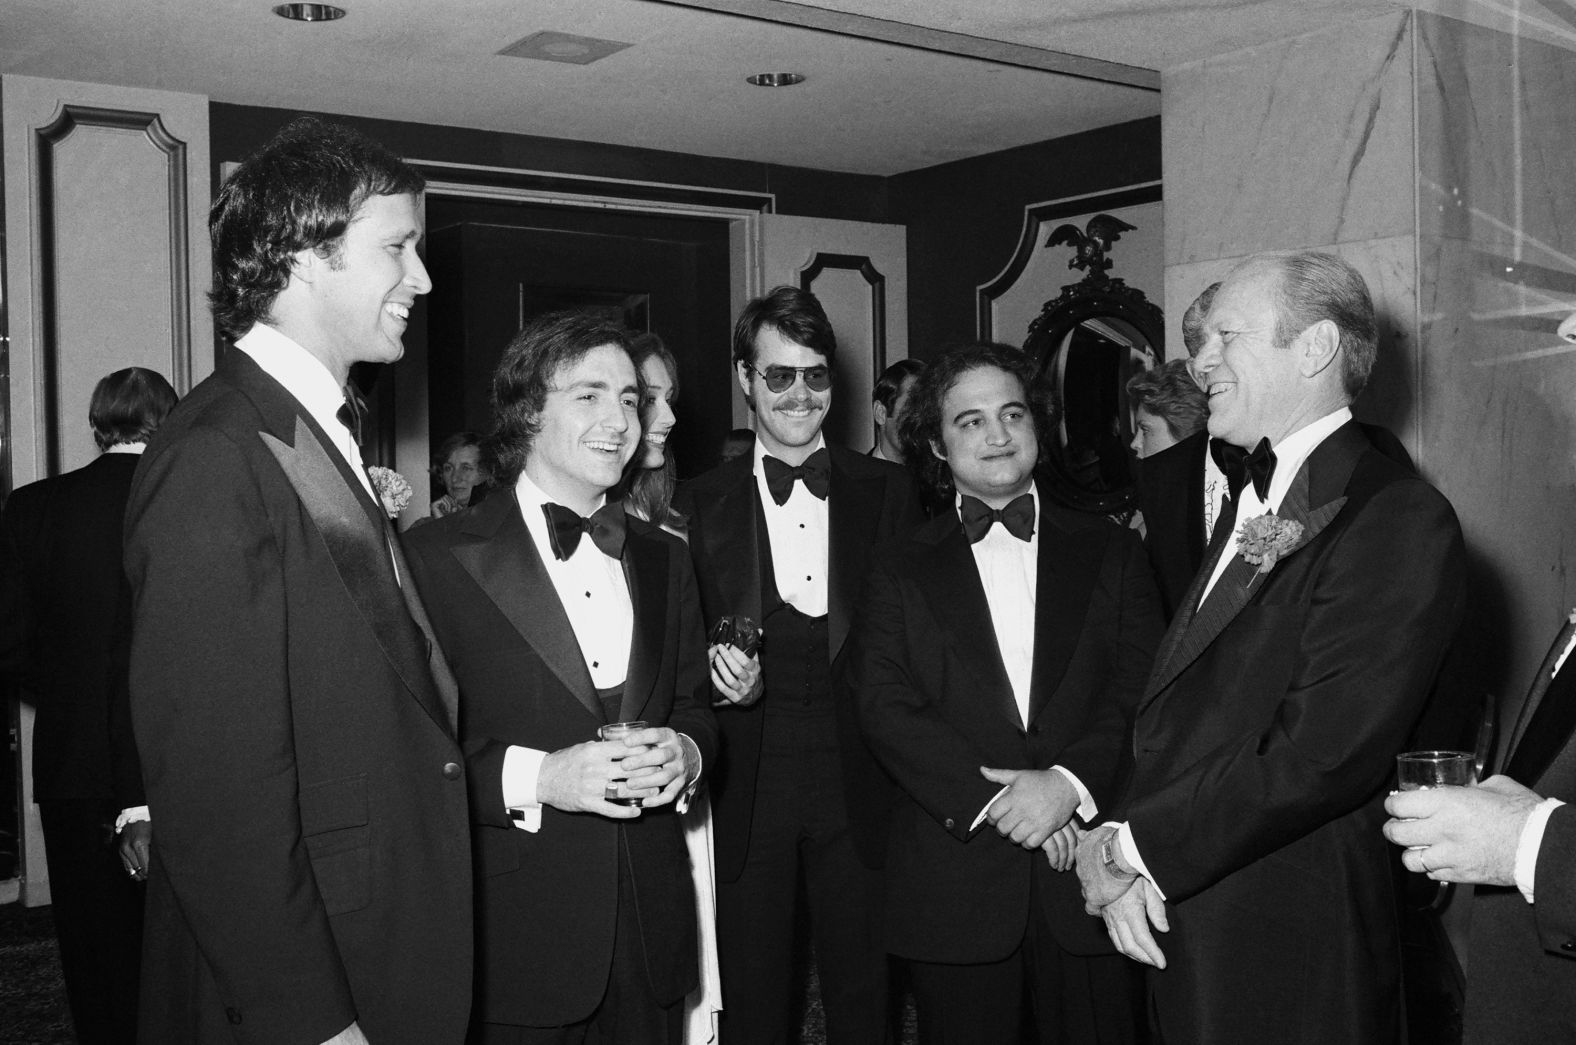 President Gerald Ford, right, speaks with comedian Chevy Chase, left, in 1976. Chase famously portrayed Ford as clumsy on "Saturday Night Live." Between the two, from left, are "Saturday Night Live" creator Lorne Michaels and cast members Dan Aykroyd and John Belushi.